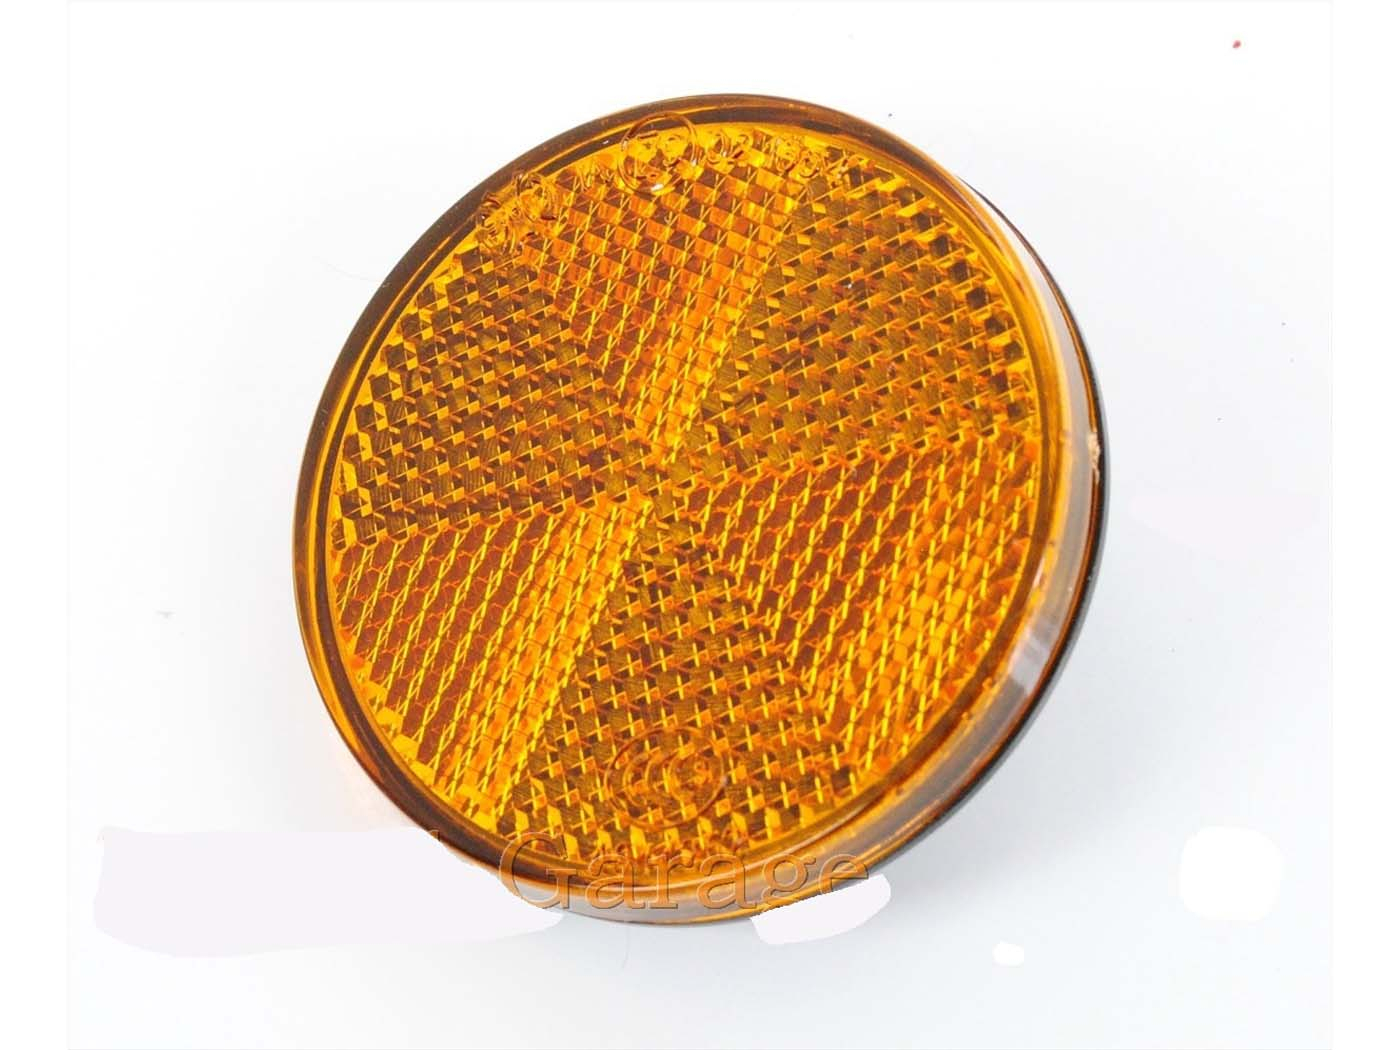 Reflector universell 55mm 7mm voor Brommer, Brommer, Mokick, scooters